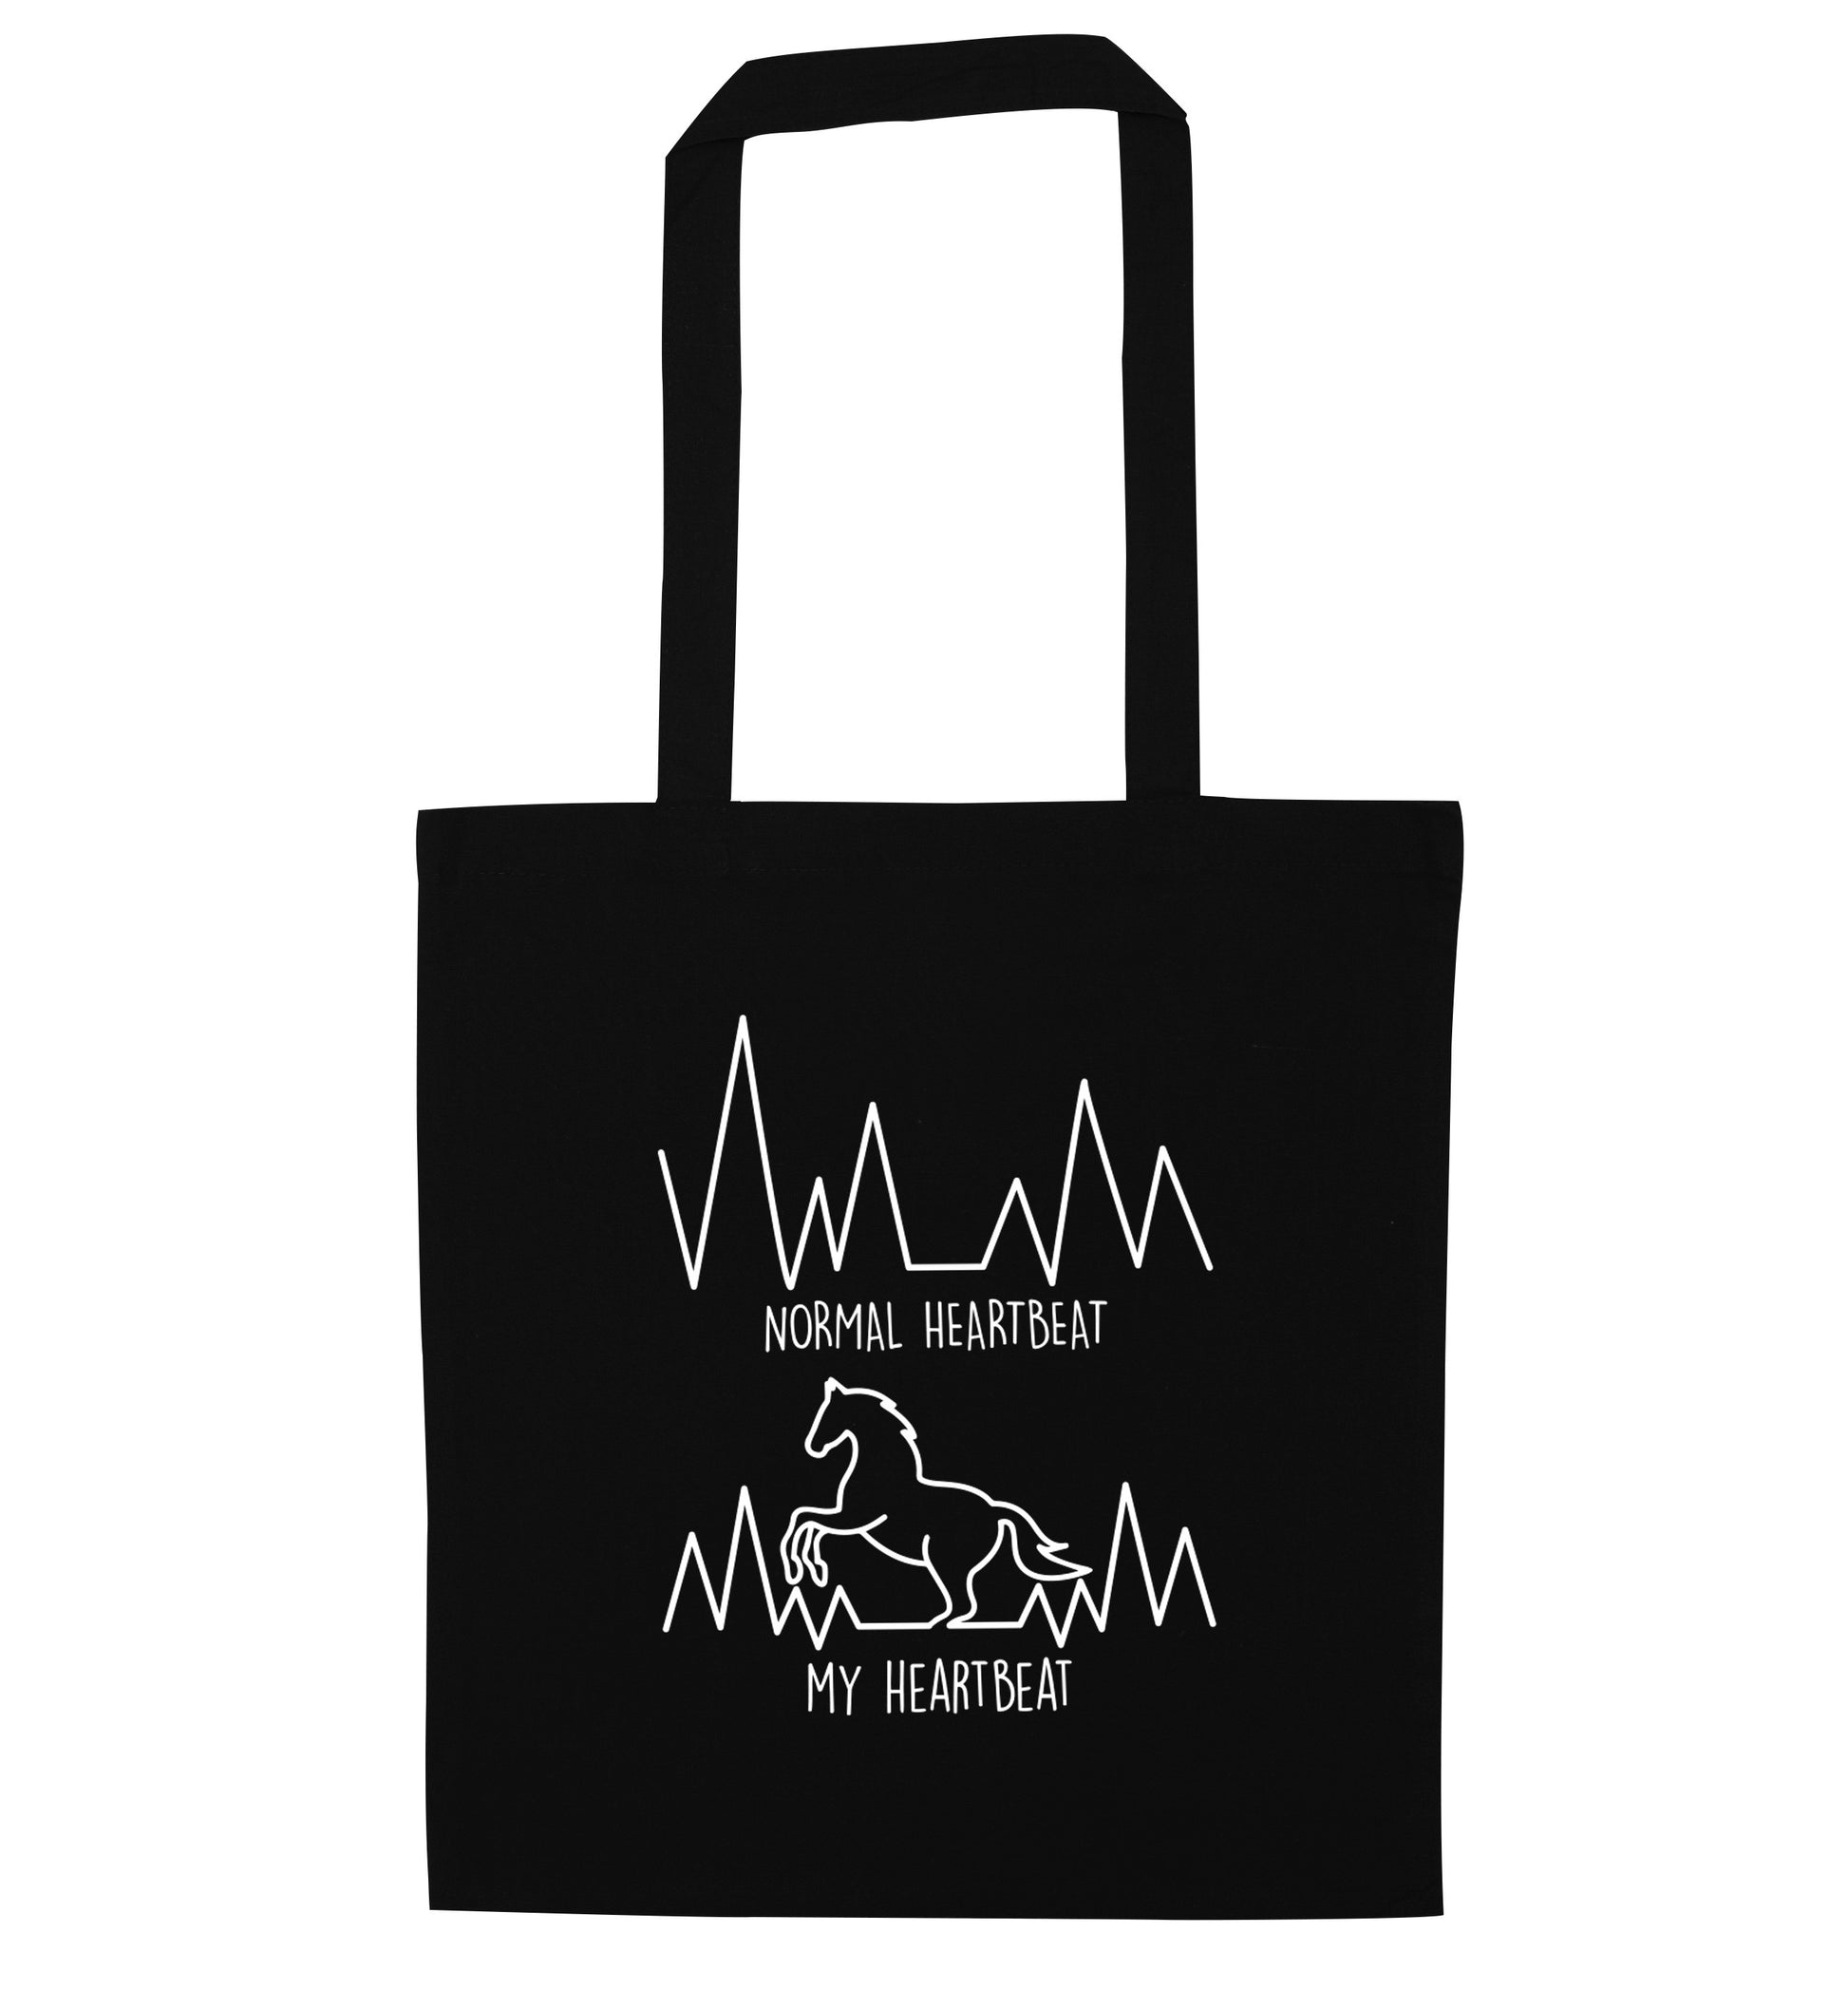 Normal heartbeat, my heartbeat horse lover black tote bag